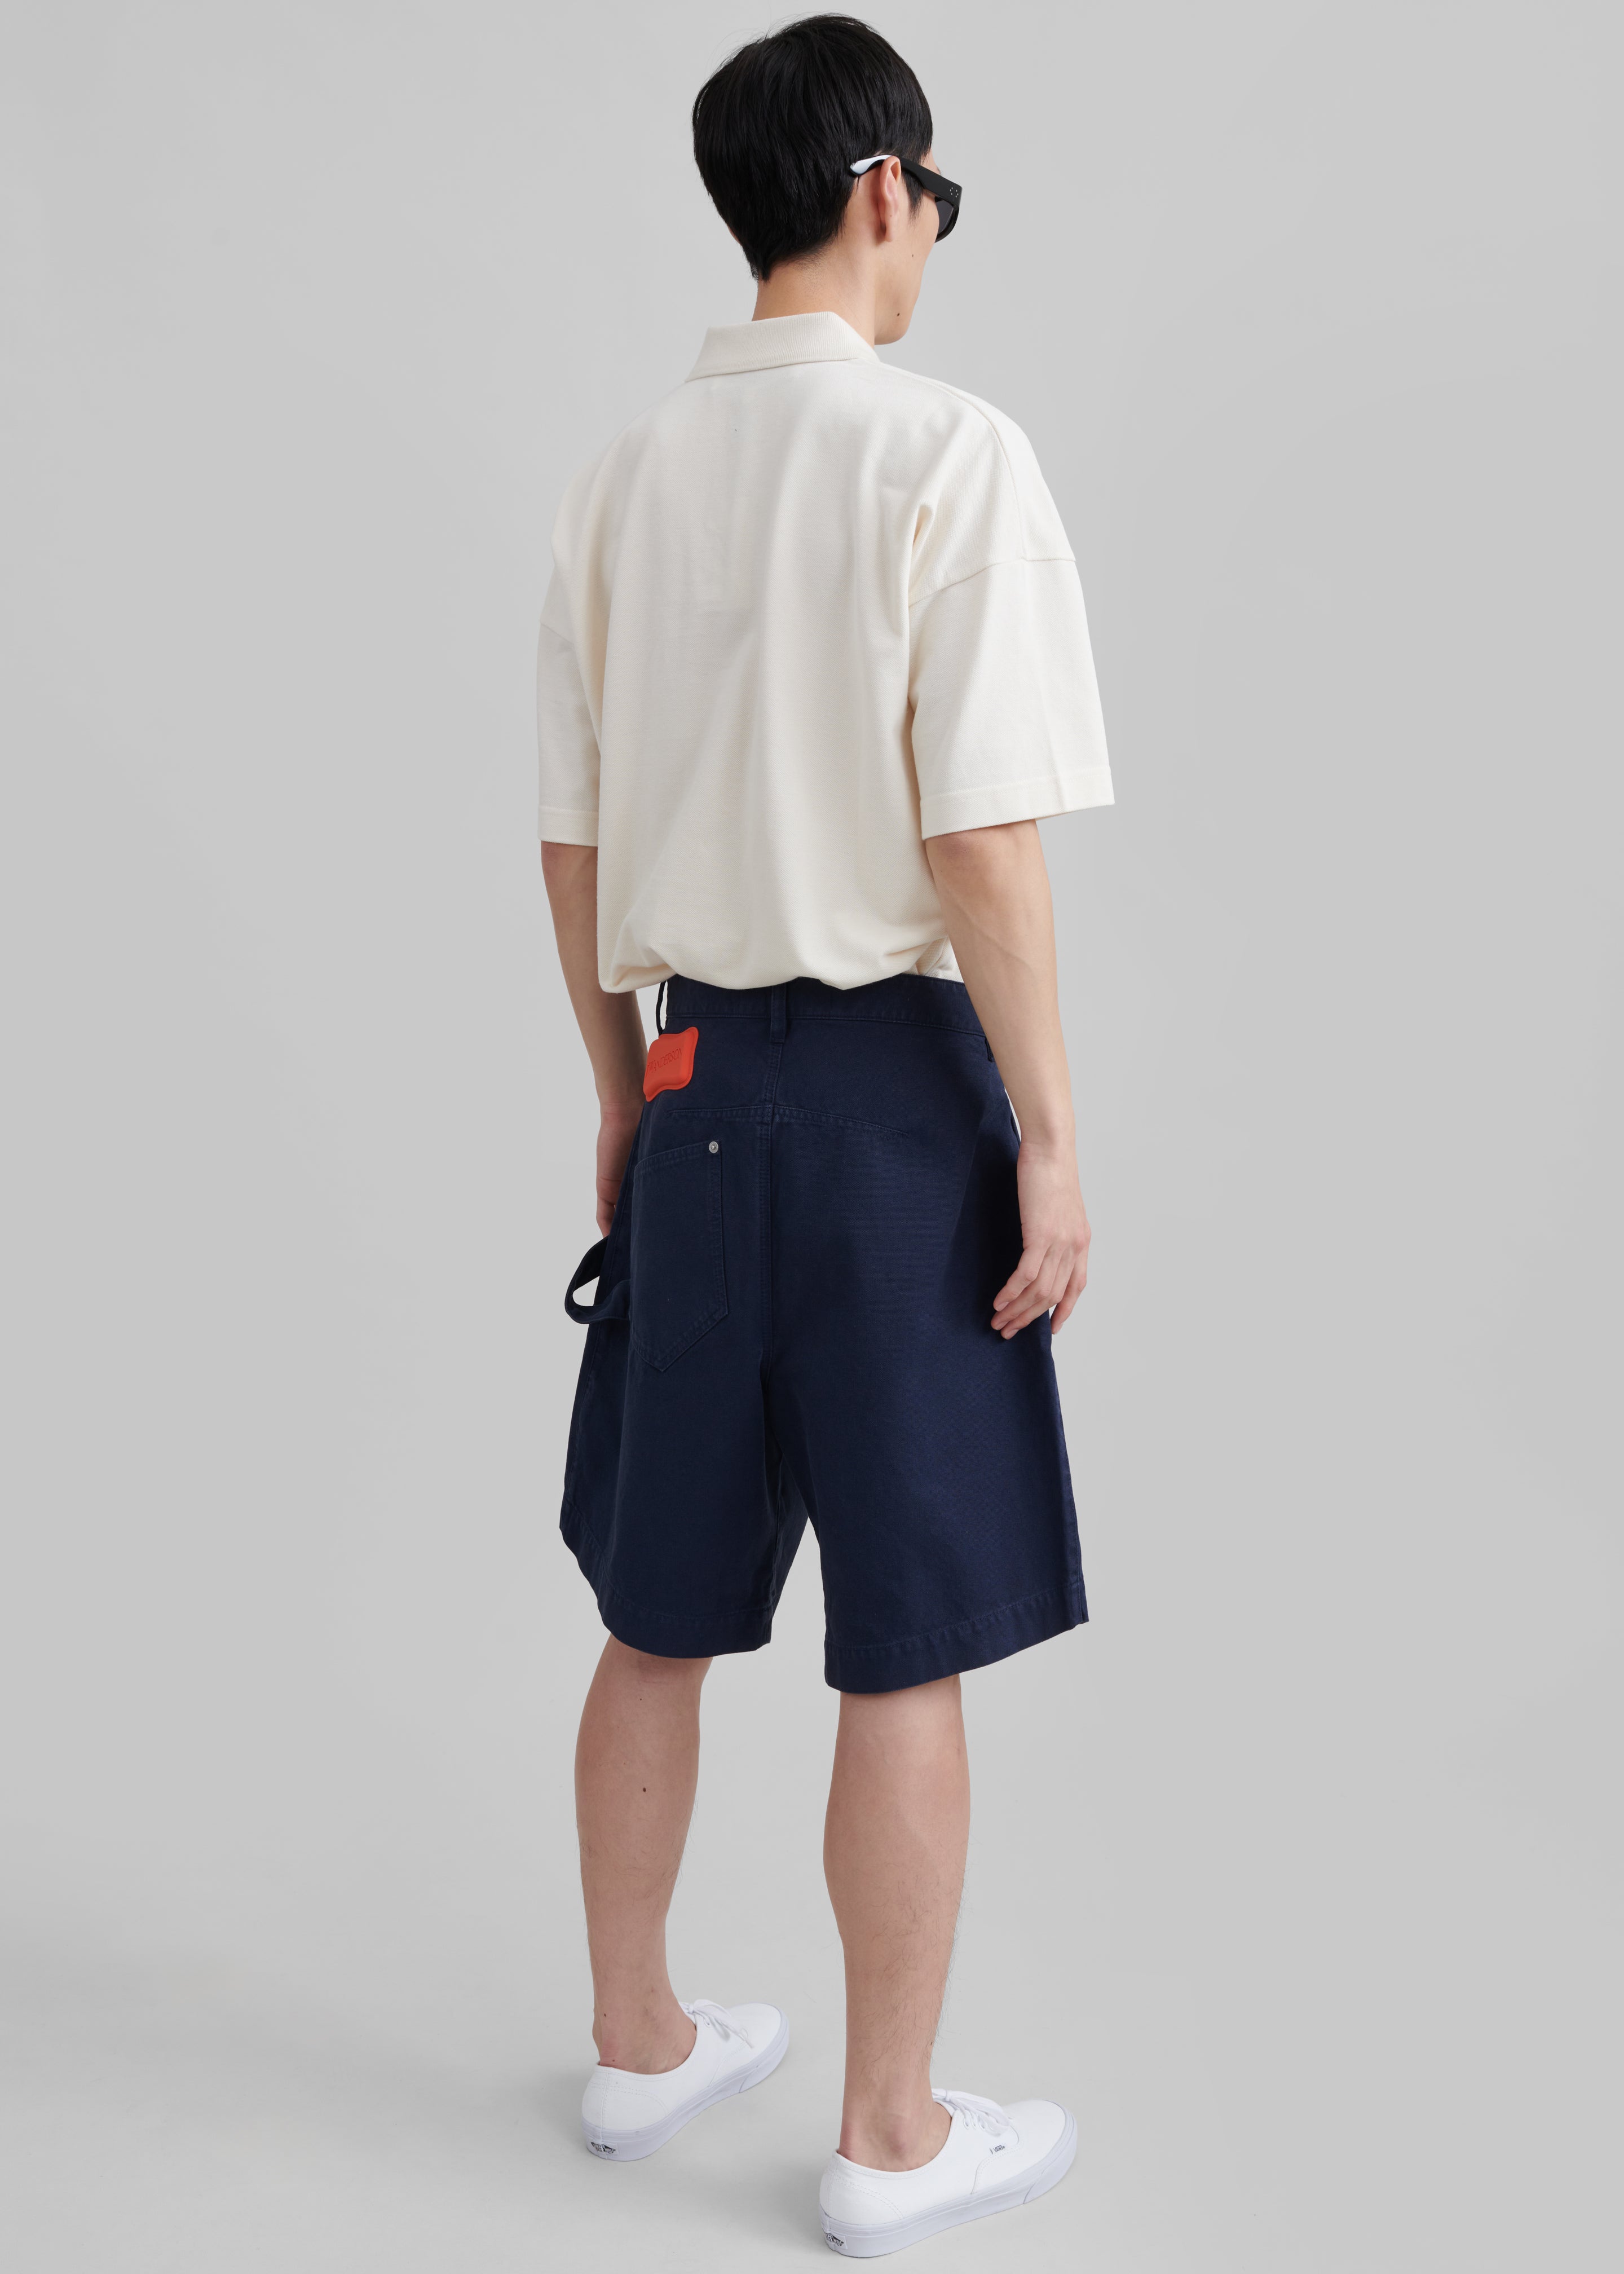 JW Anderson Twisted Shorts - Navy - 8